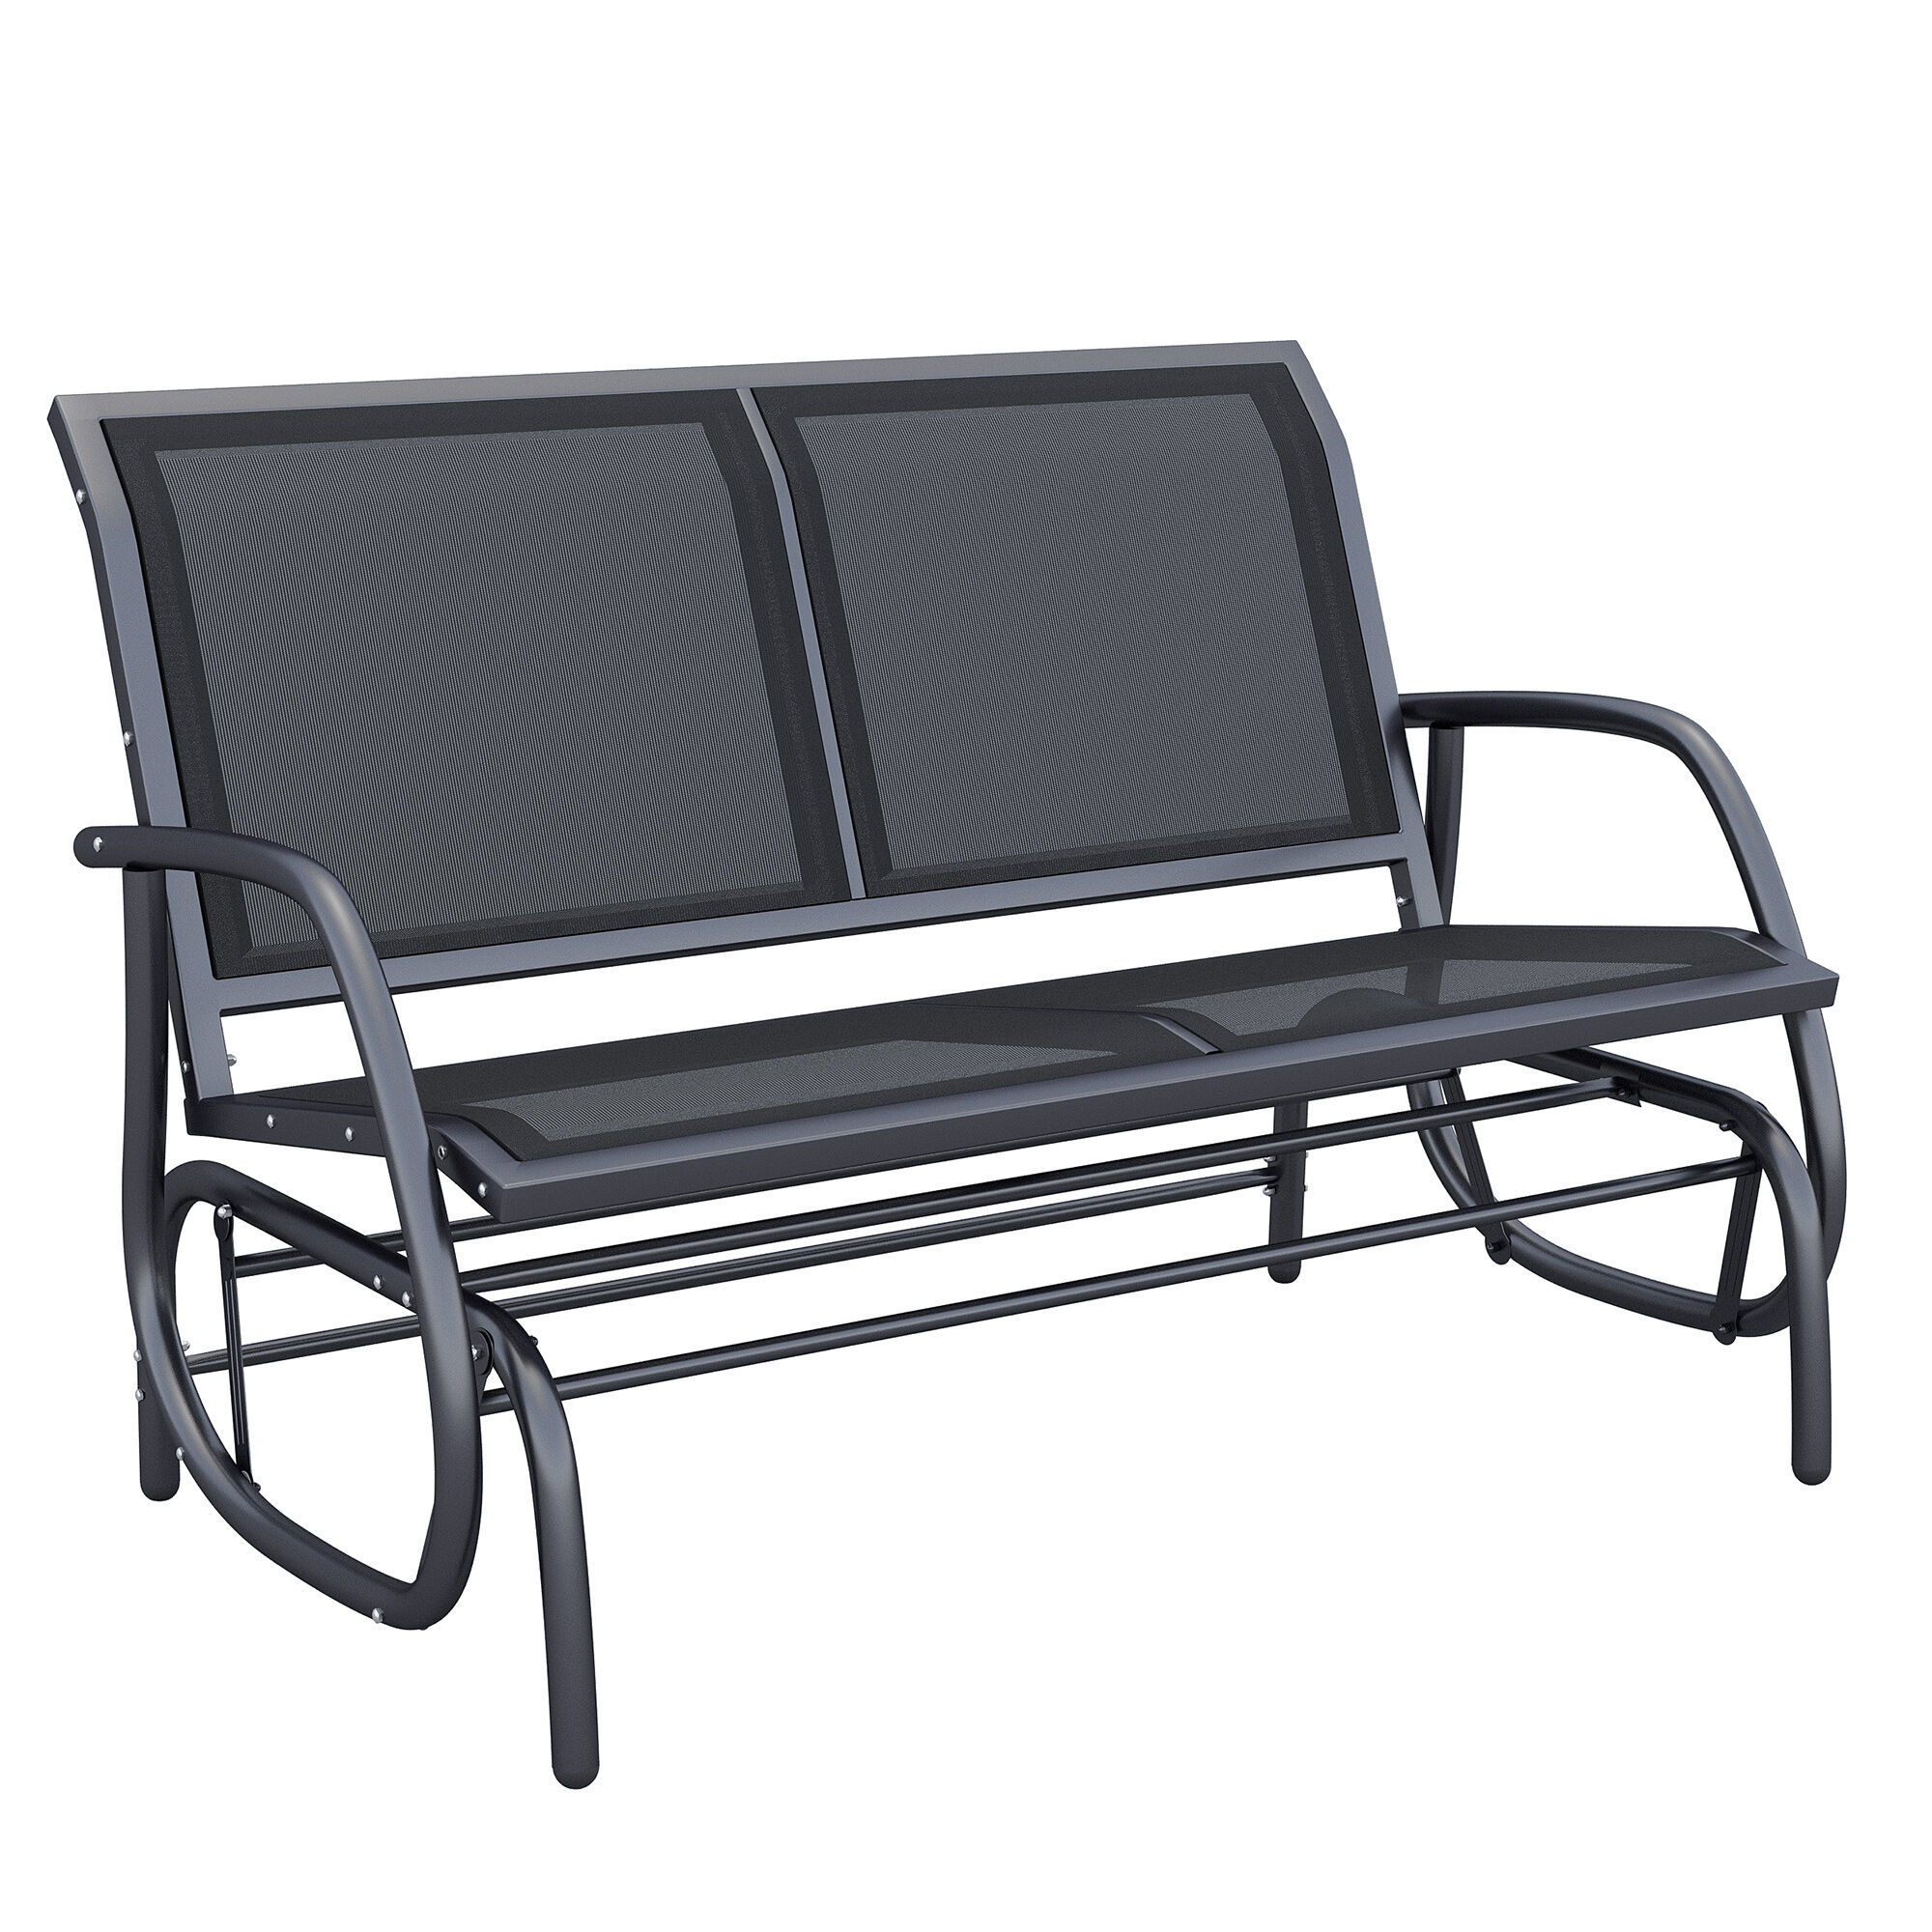 Outsunny Outdoor Glider Rocking Chair for 2, Patio Bench Swing with Steel Frame, Ideal for Garden, Porch - Black   Aosom.com